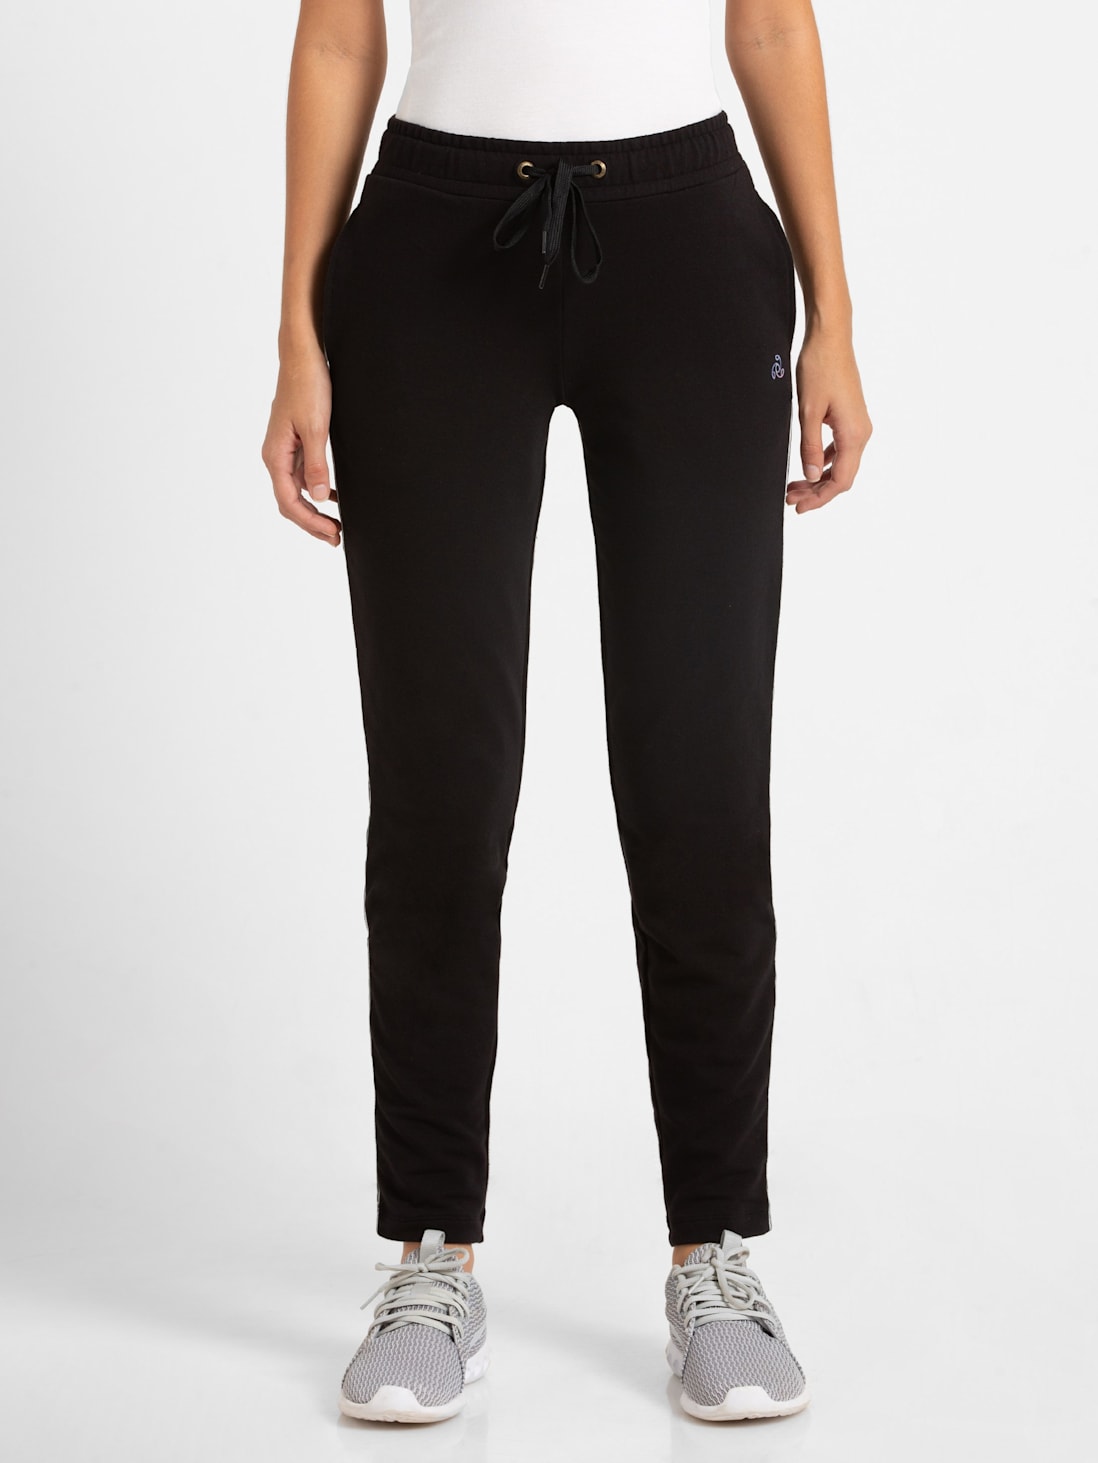 2021 Lowest Price] Jockey Solid Women Black Track Pants Price in India &  Specifications